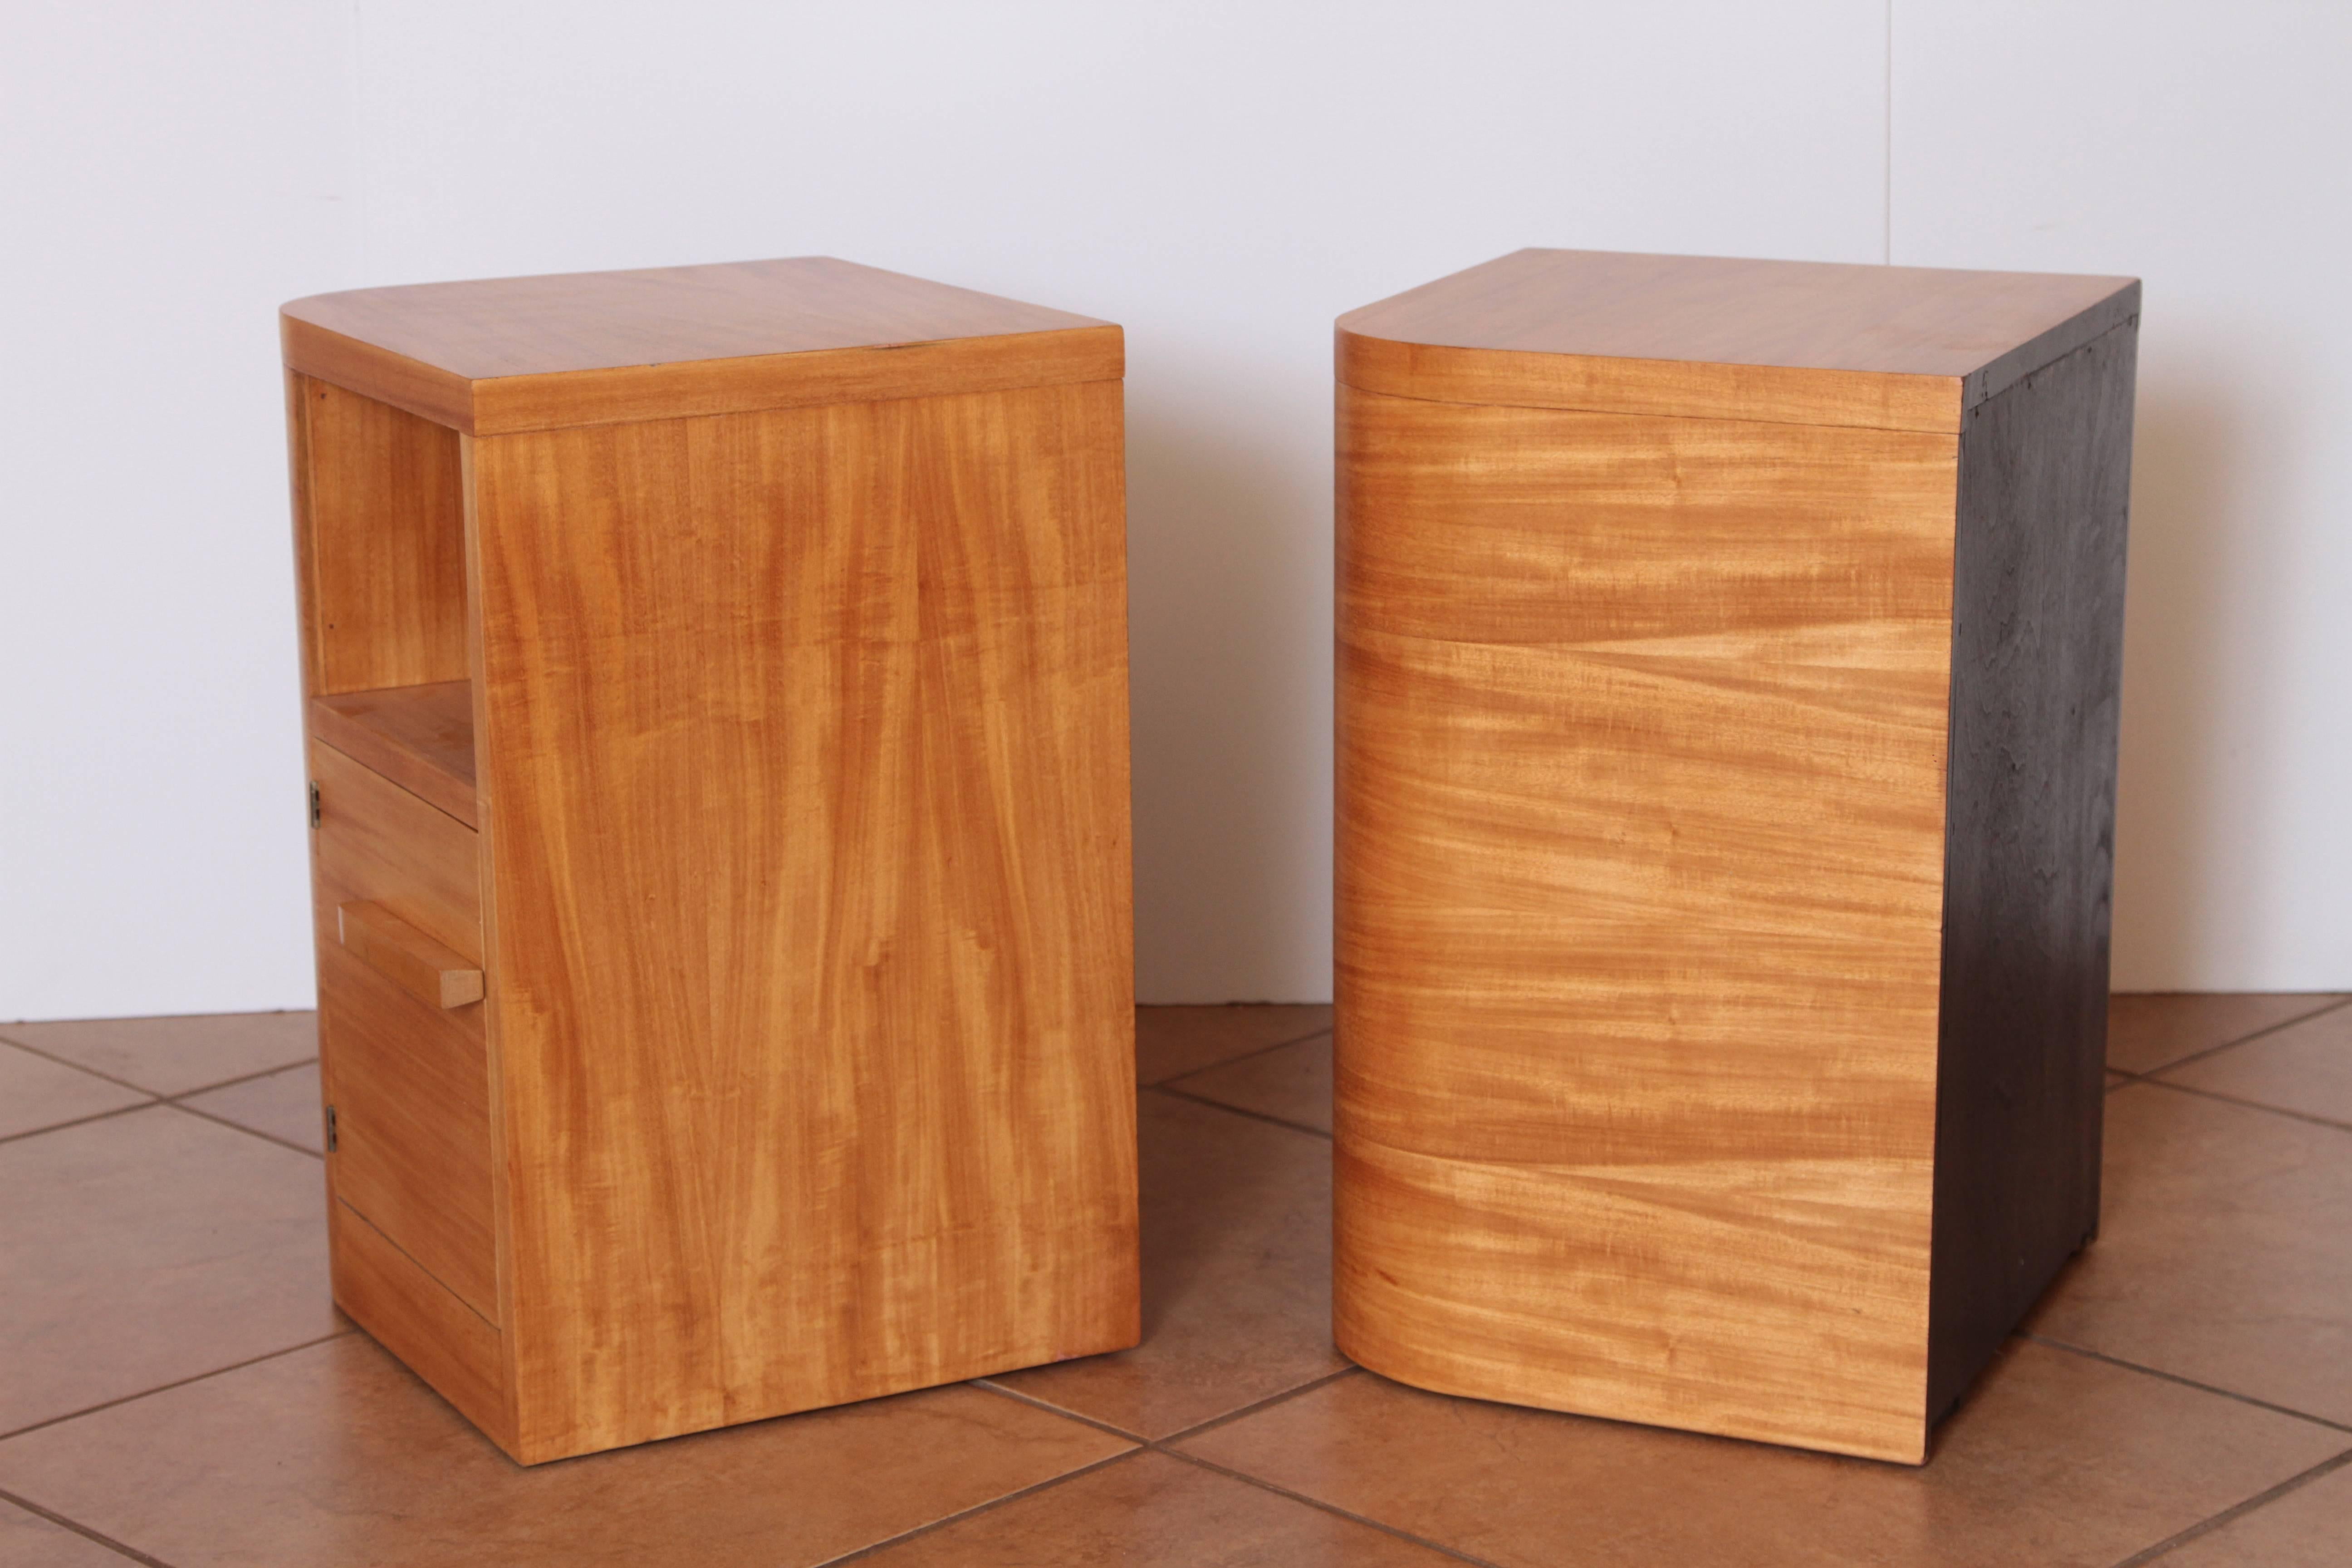 Lacquered Art Deco Modern Age Nightstands / End Tables, Manner of Donald Deskey, Pair